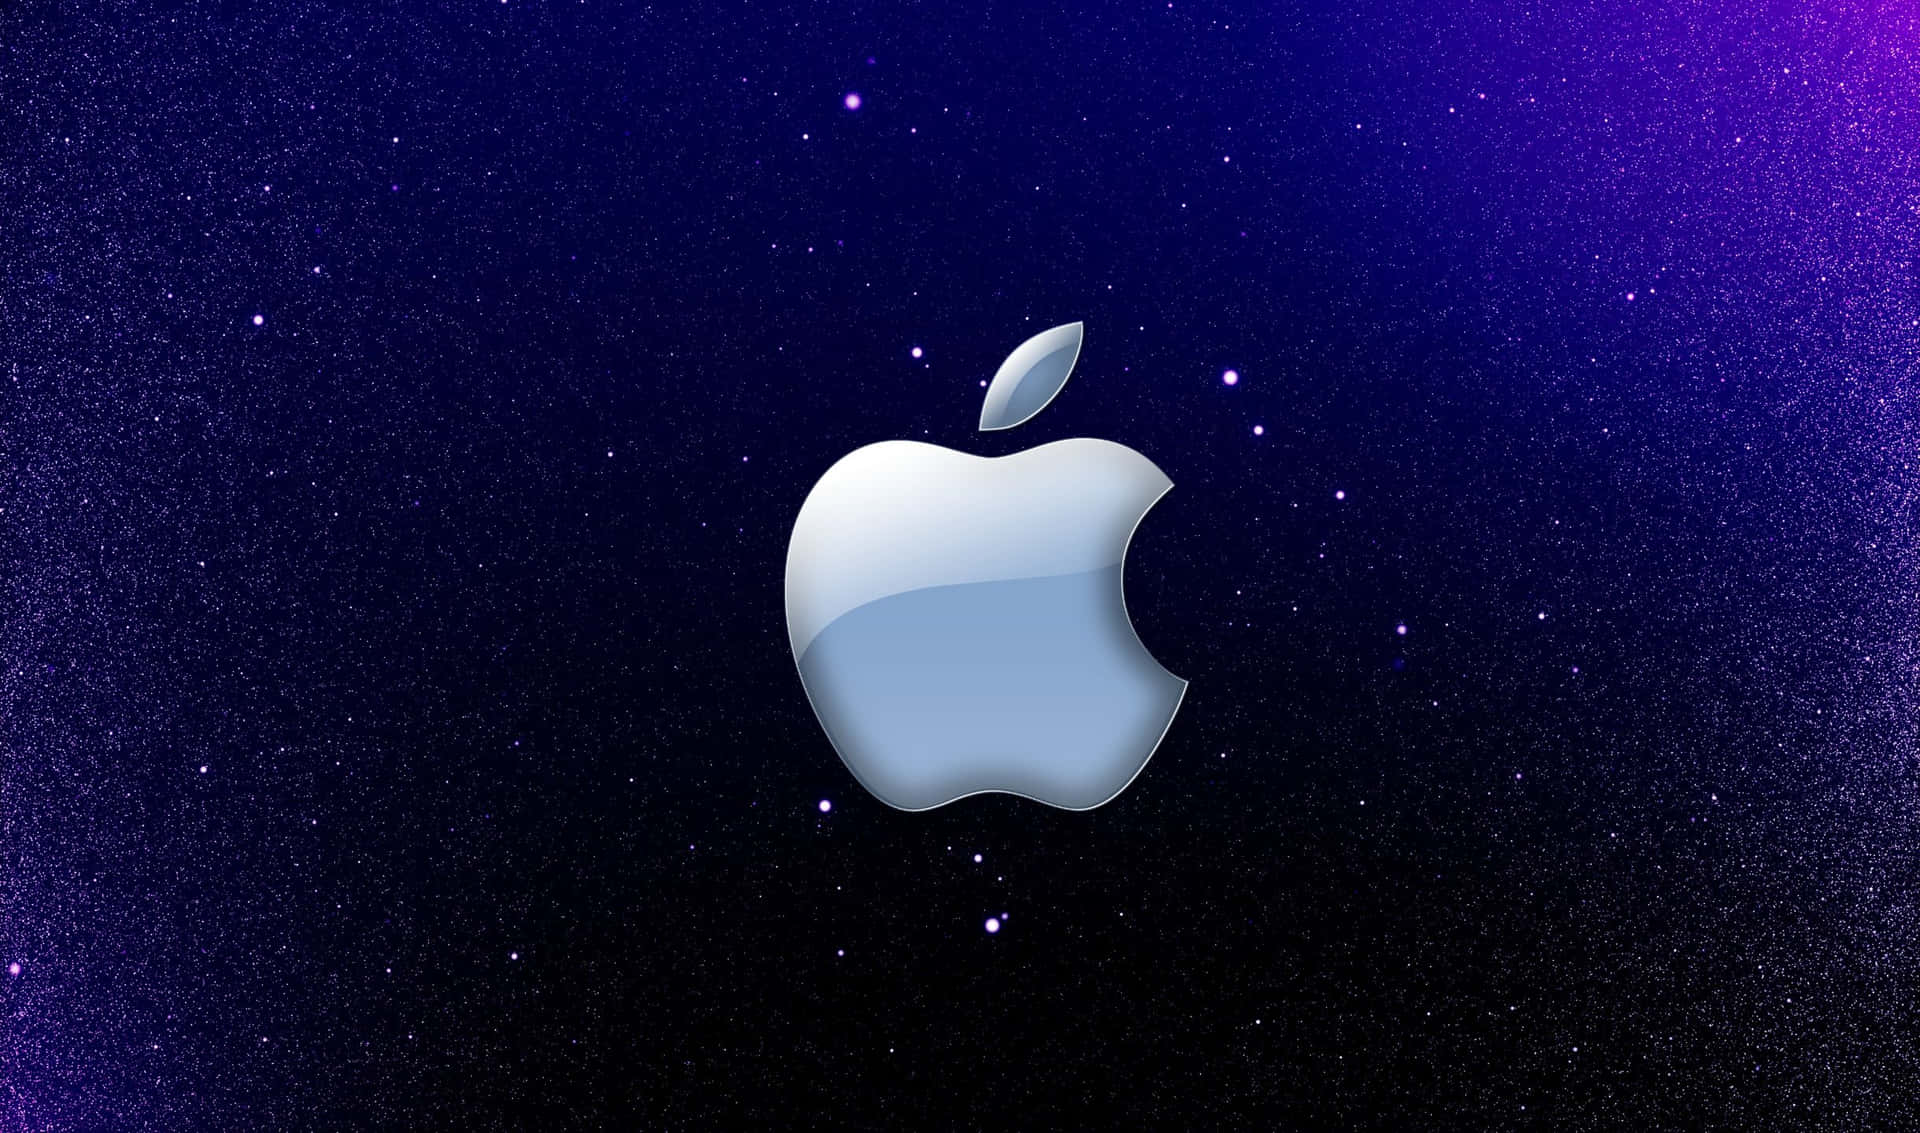 Download 2440x1440 Silver Apple Logo Background | Wallpapers.com